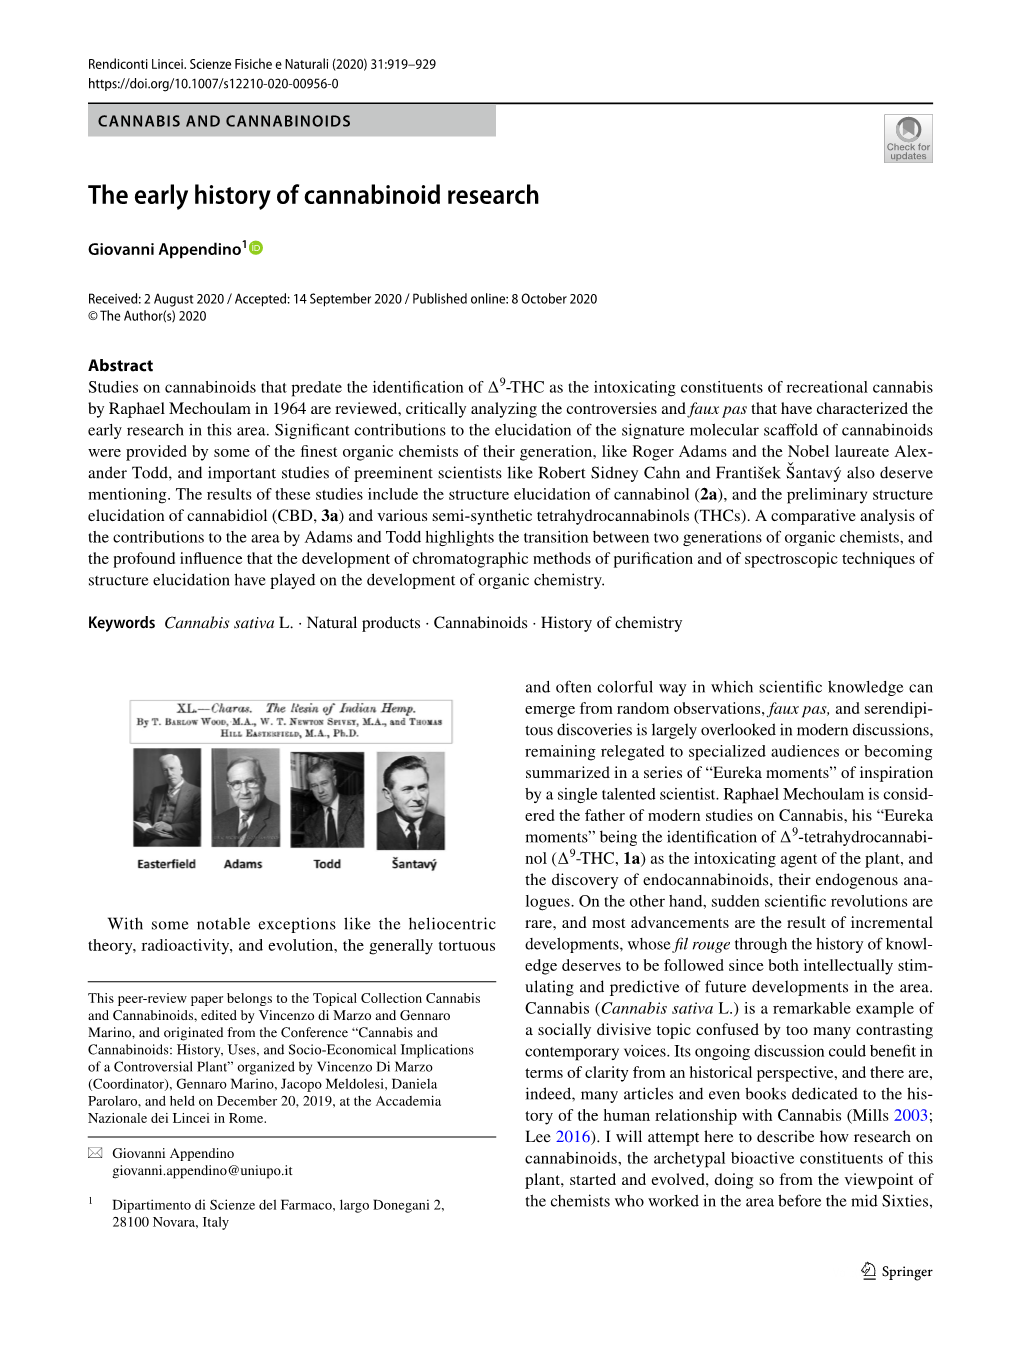 The Early History of Cannabinoid Research